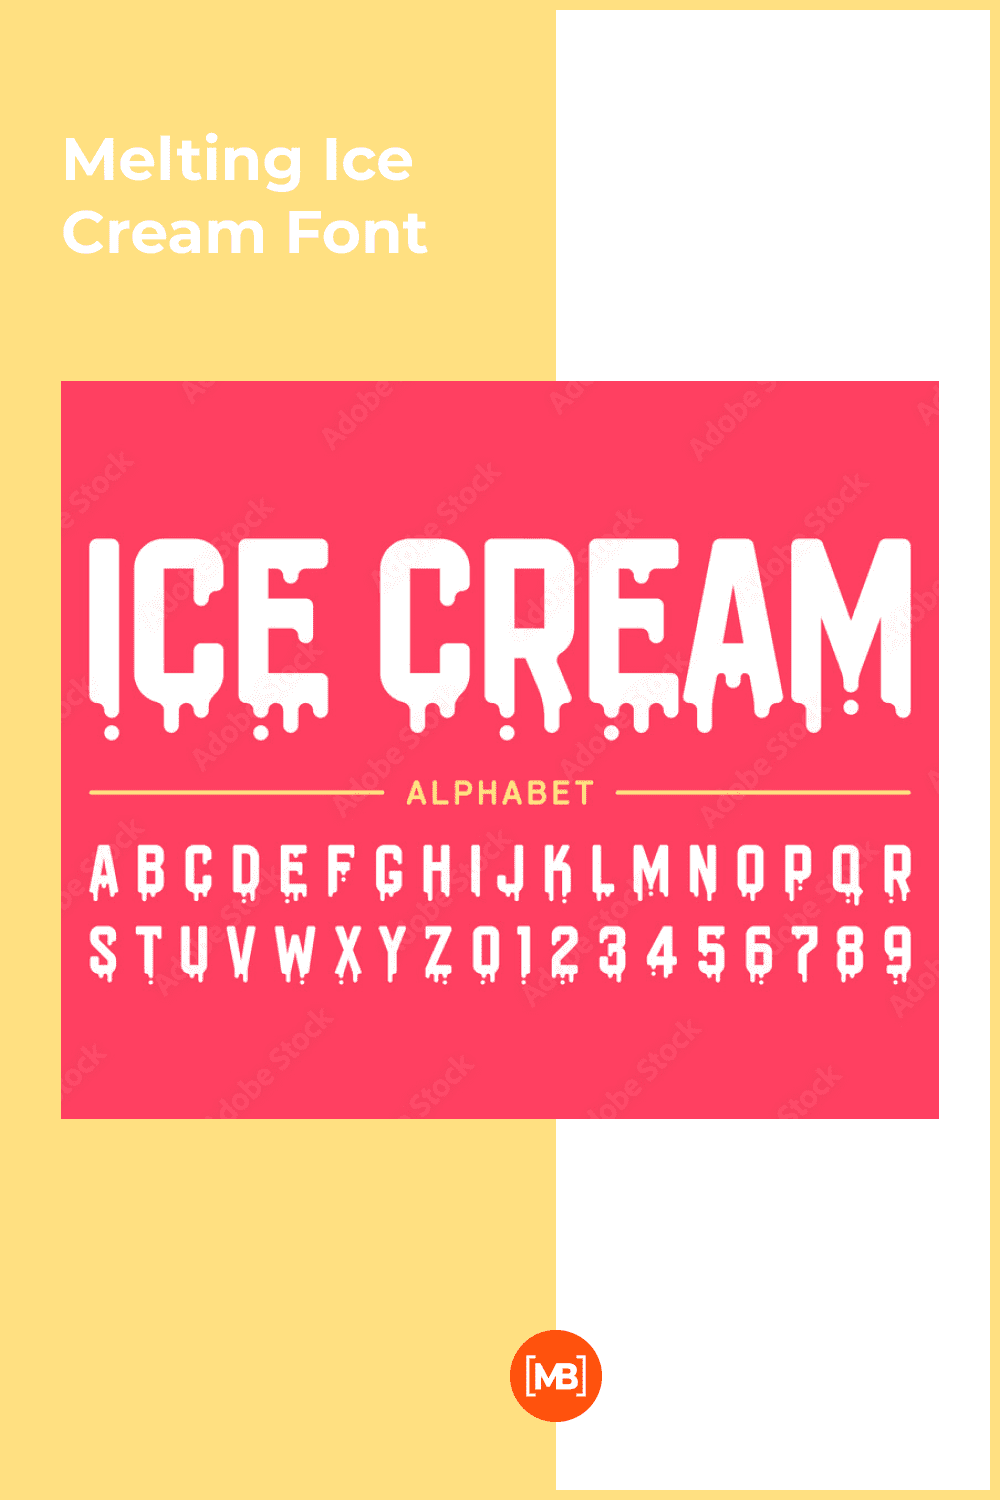 Ice cream style font with dripping drops.